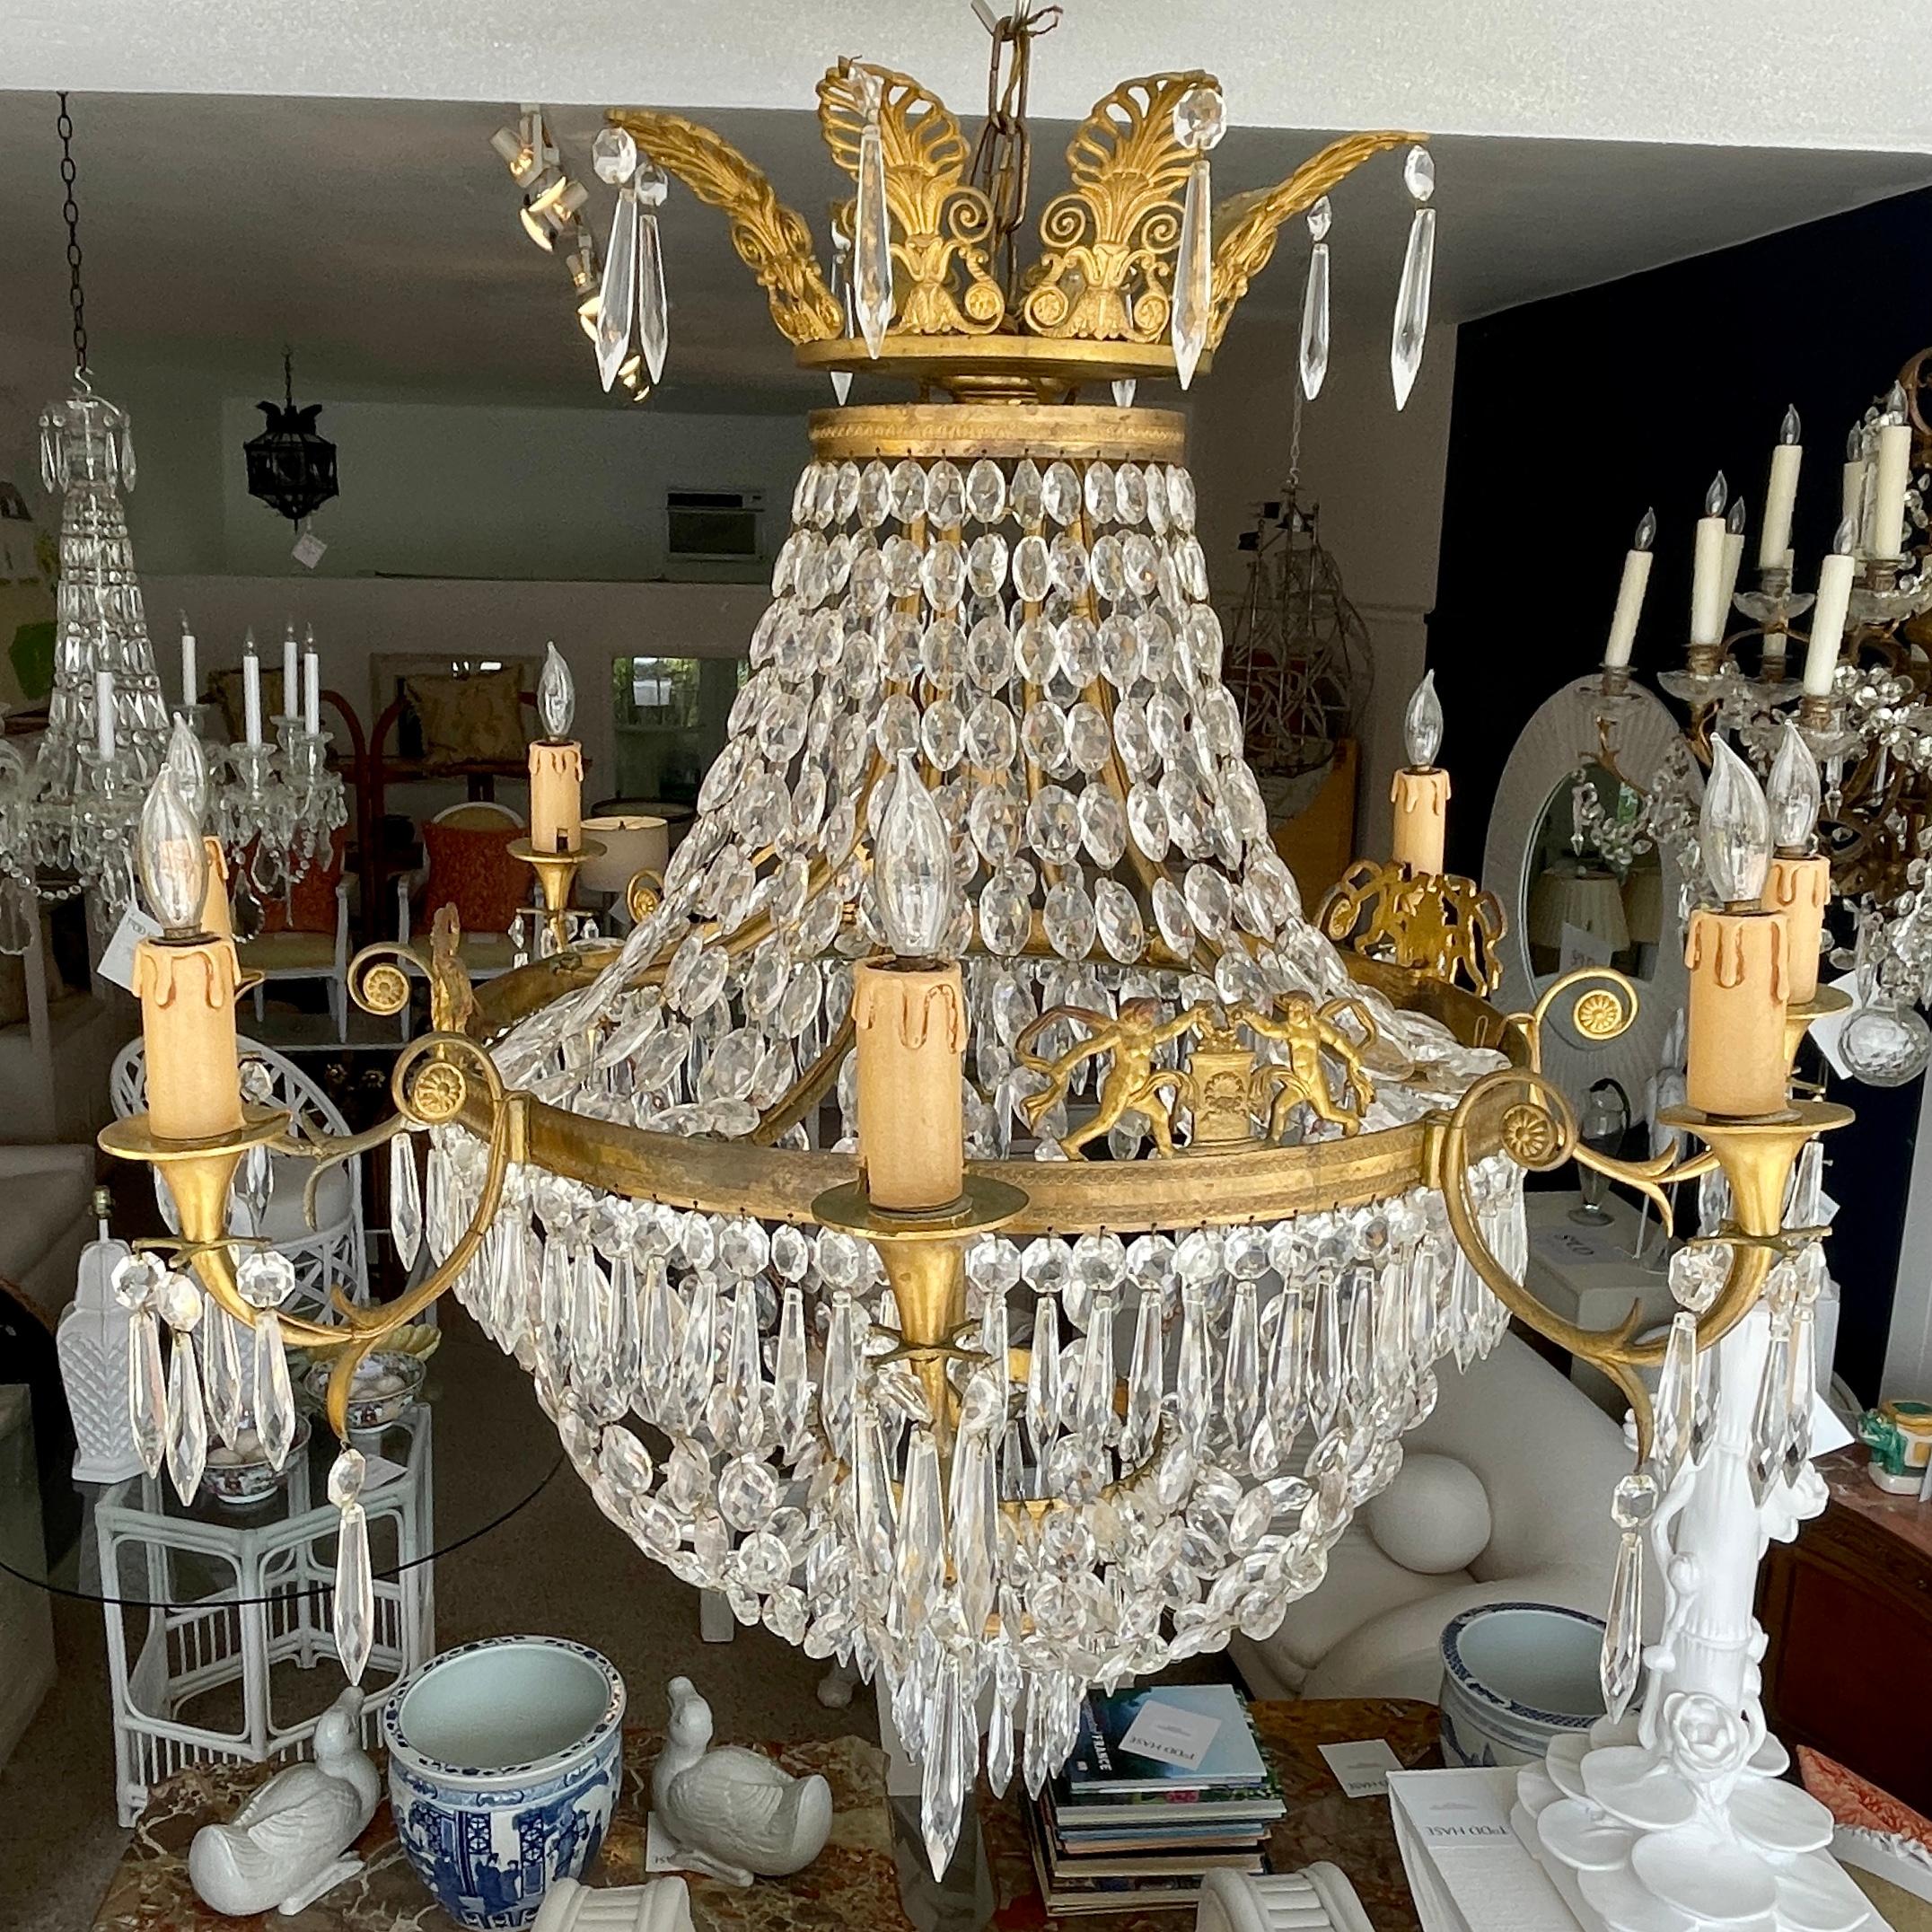 19th Century French Empire Gilt Bronze and Crystal Chandelier